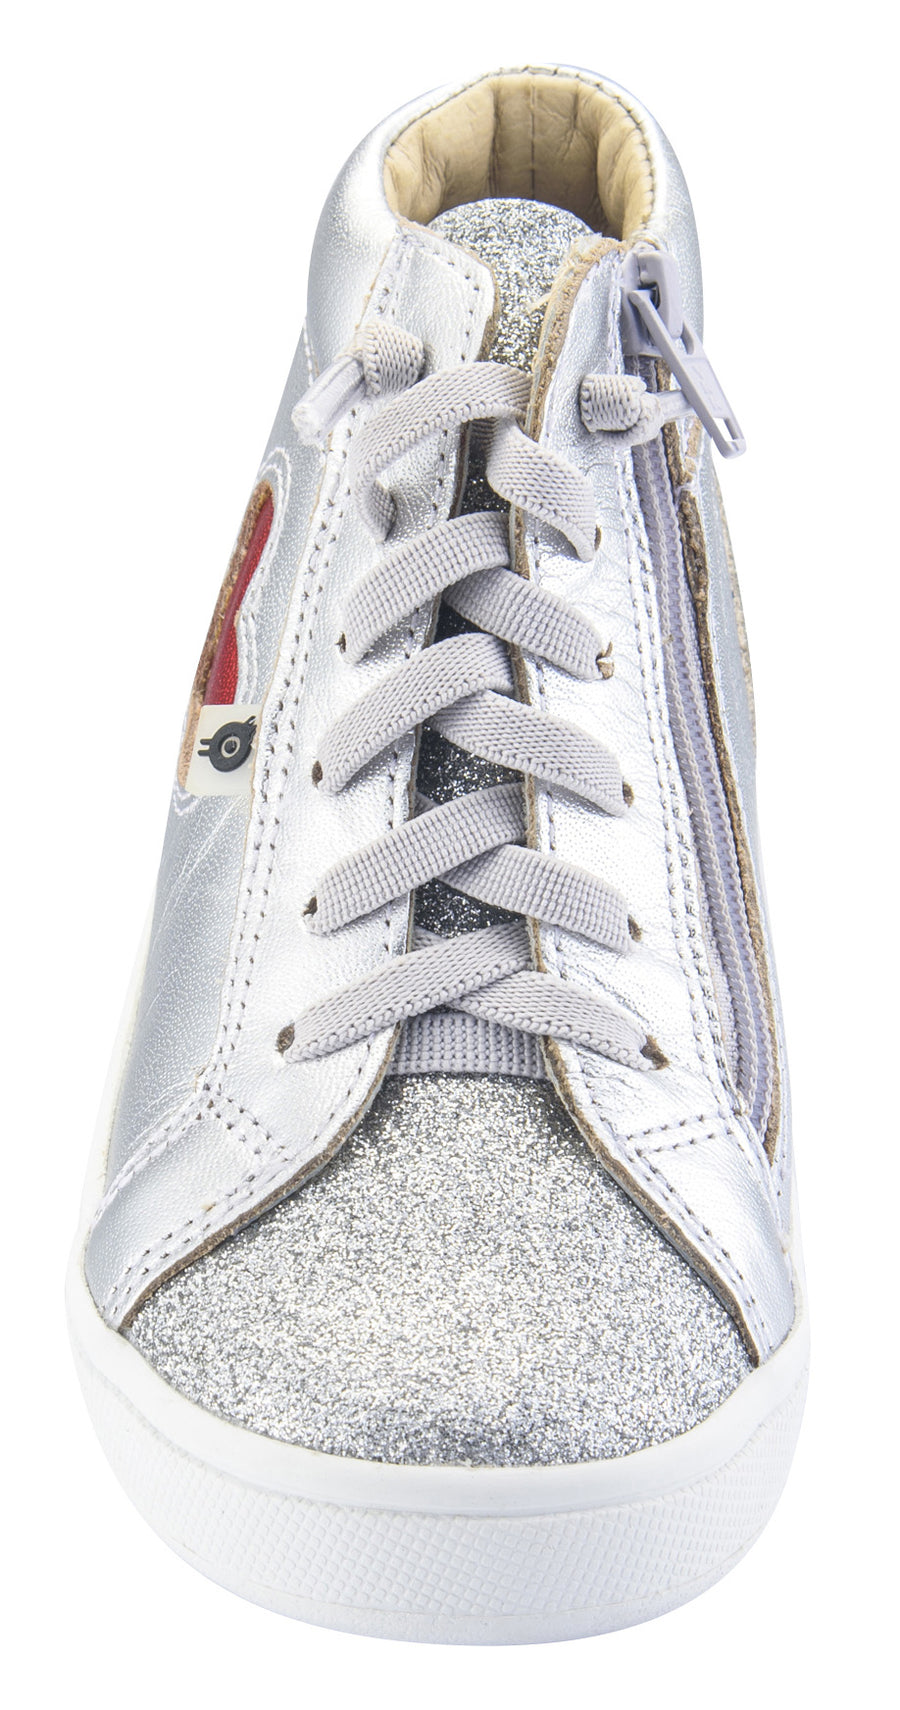 Old Soles Girl's Hearty High Top Leather Sneakers, Glam Argent